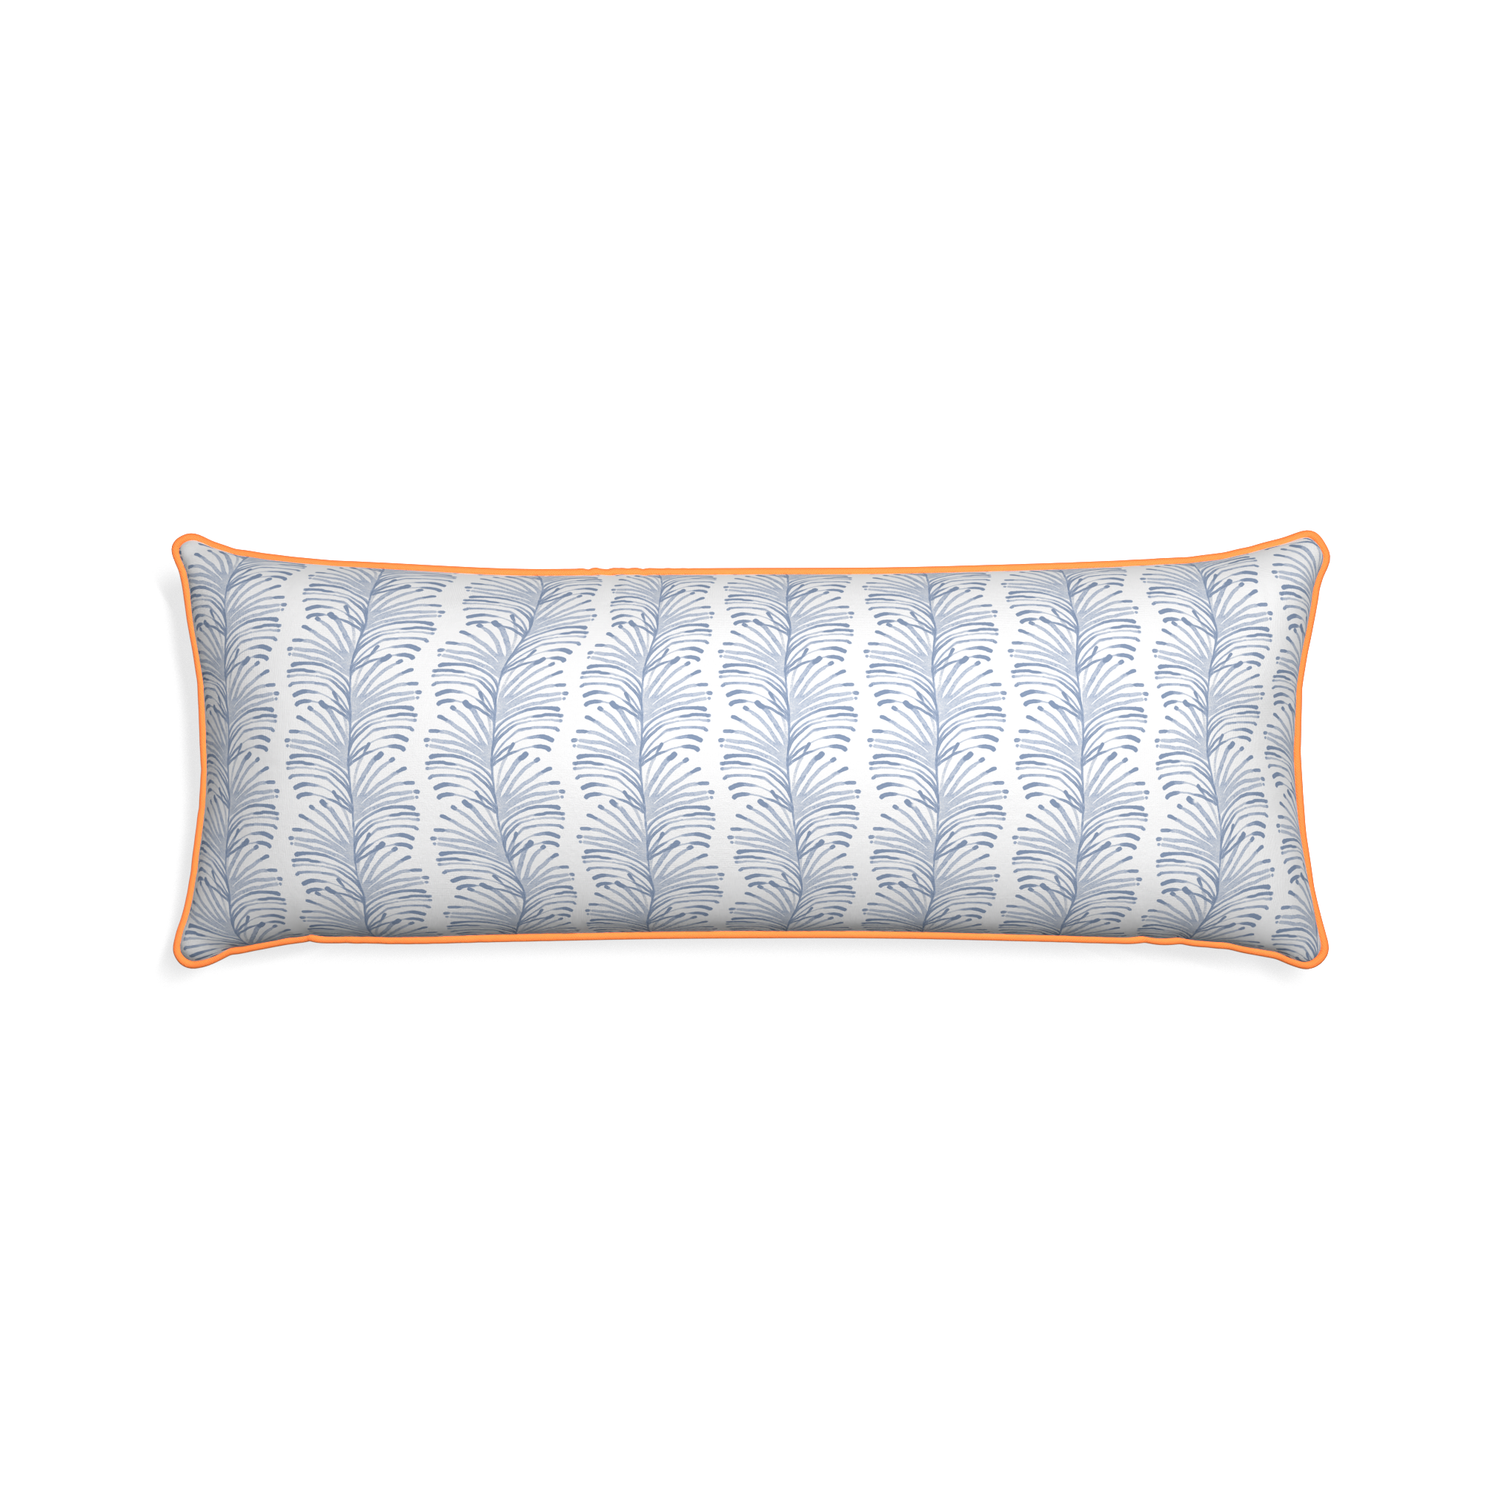 Xl-lumbar emma sky custom sky blue botanical stripepillow with clementine piping on white background